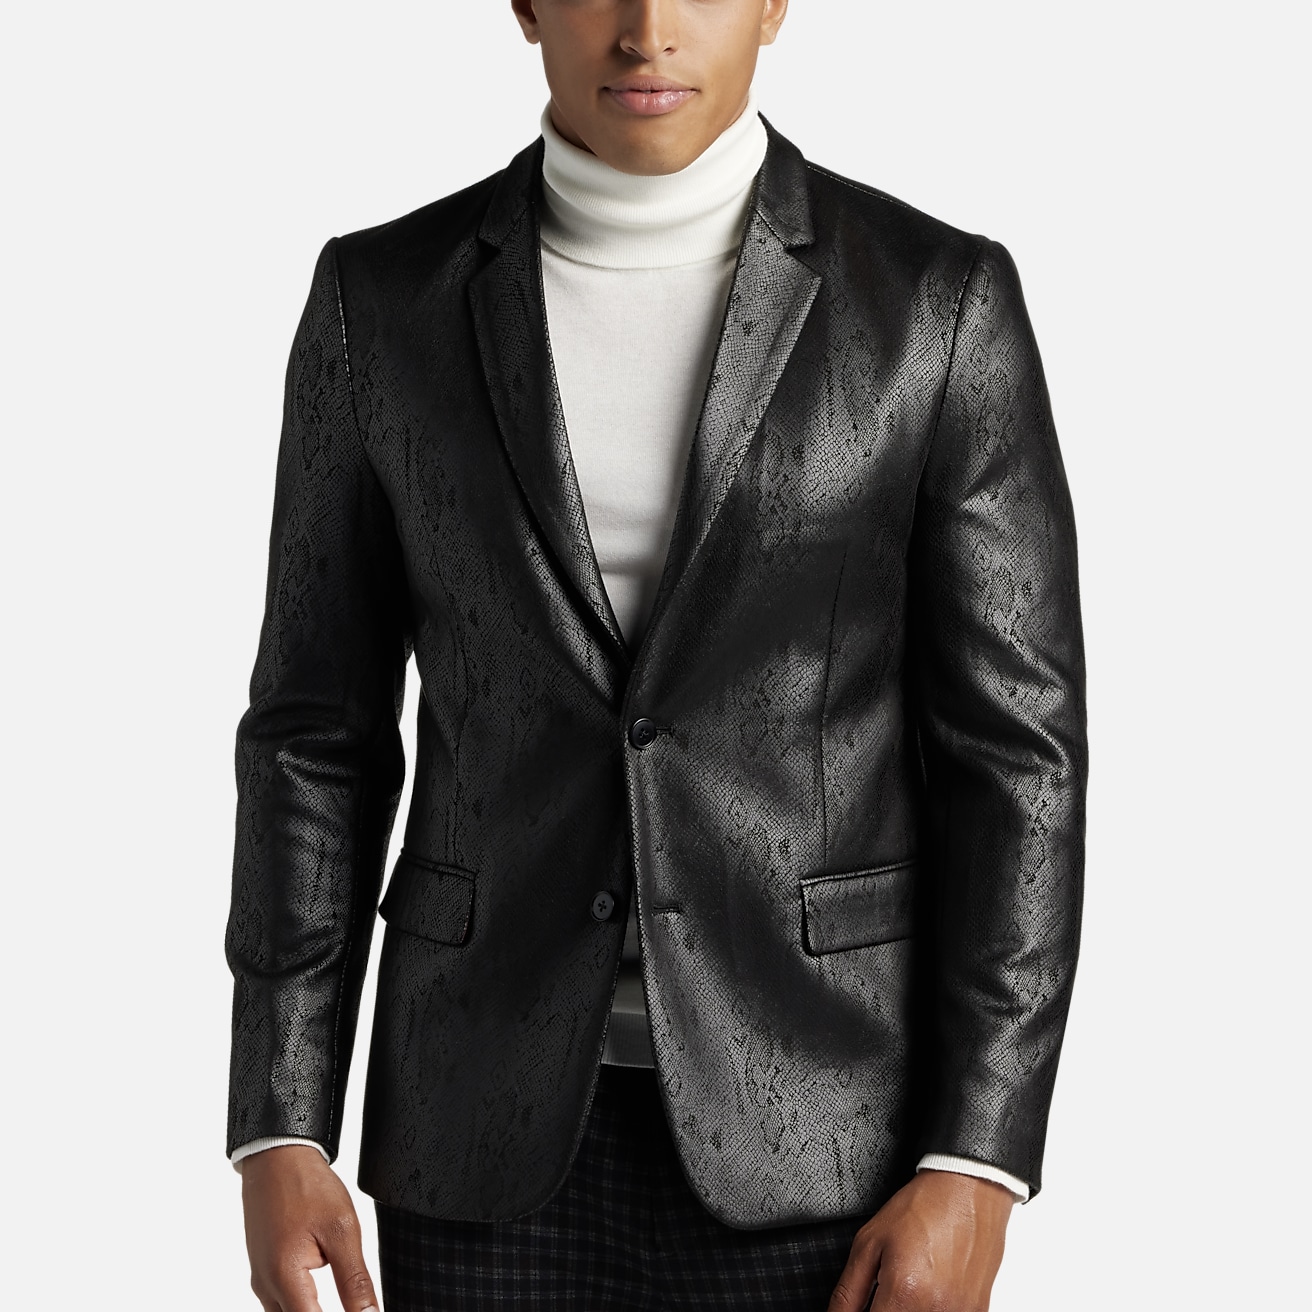 What do you think of wearing a slim-fit black leather jacket with